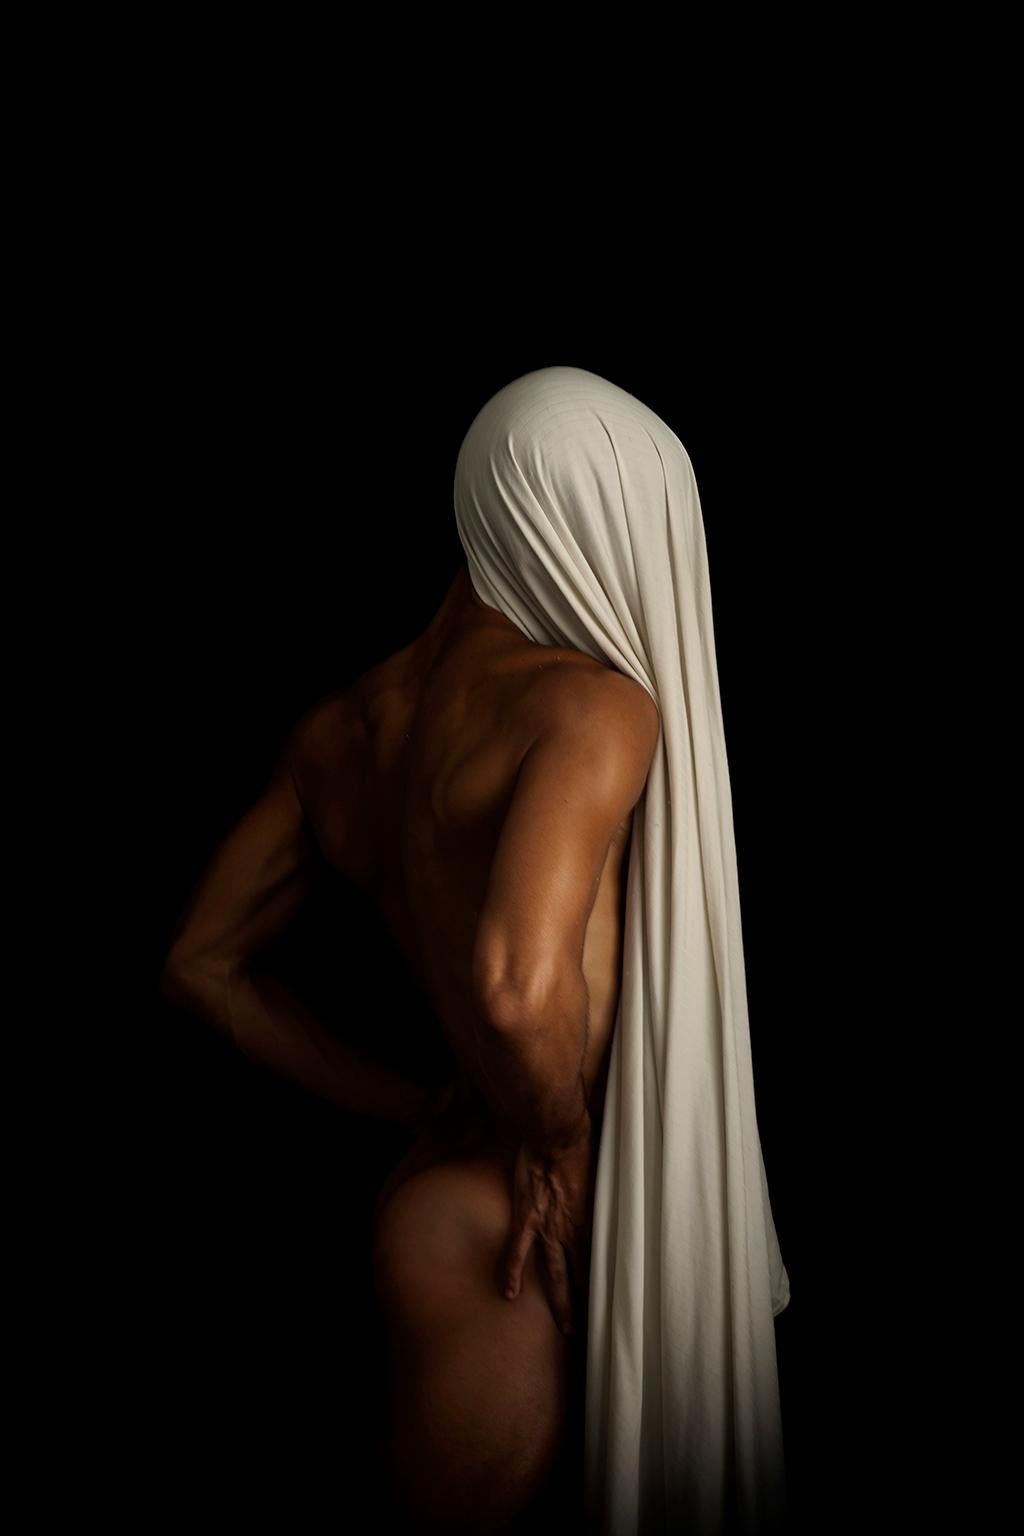 Cortina. From the "Viva" series. Male Nude Limited Edition Color Photograph